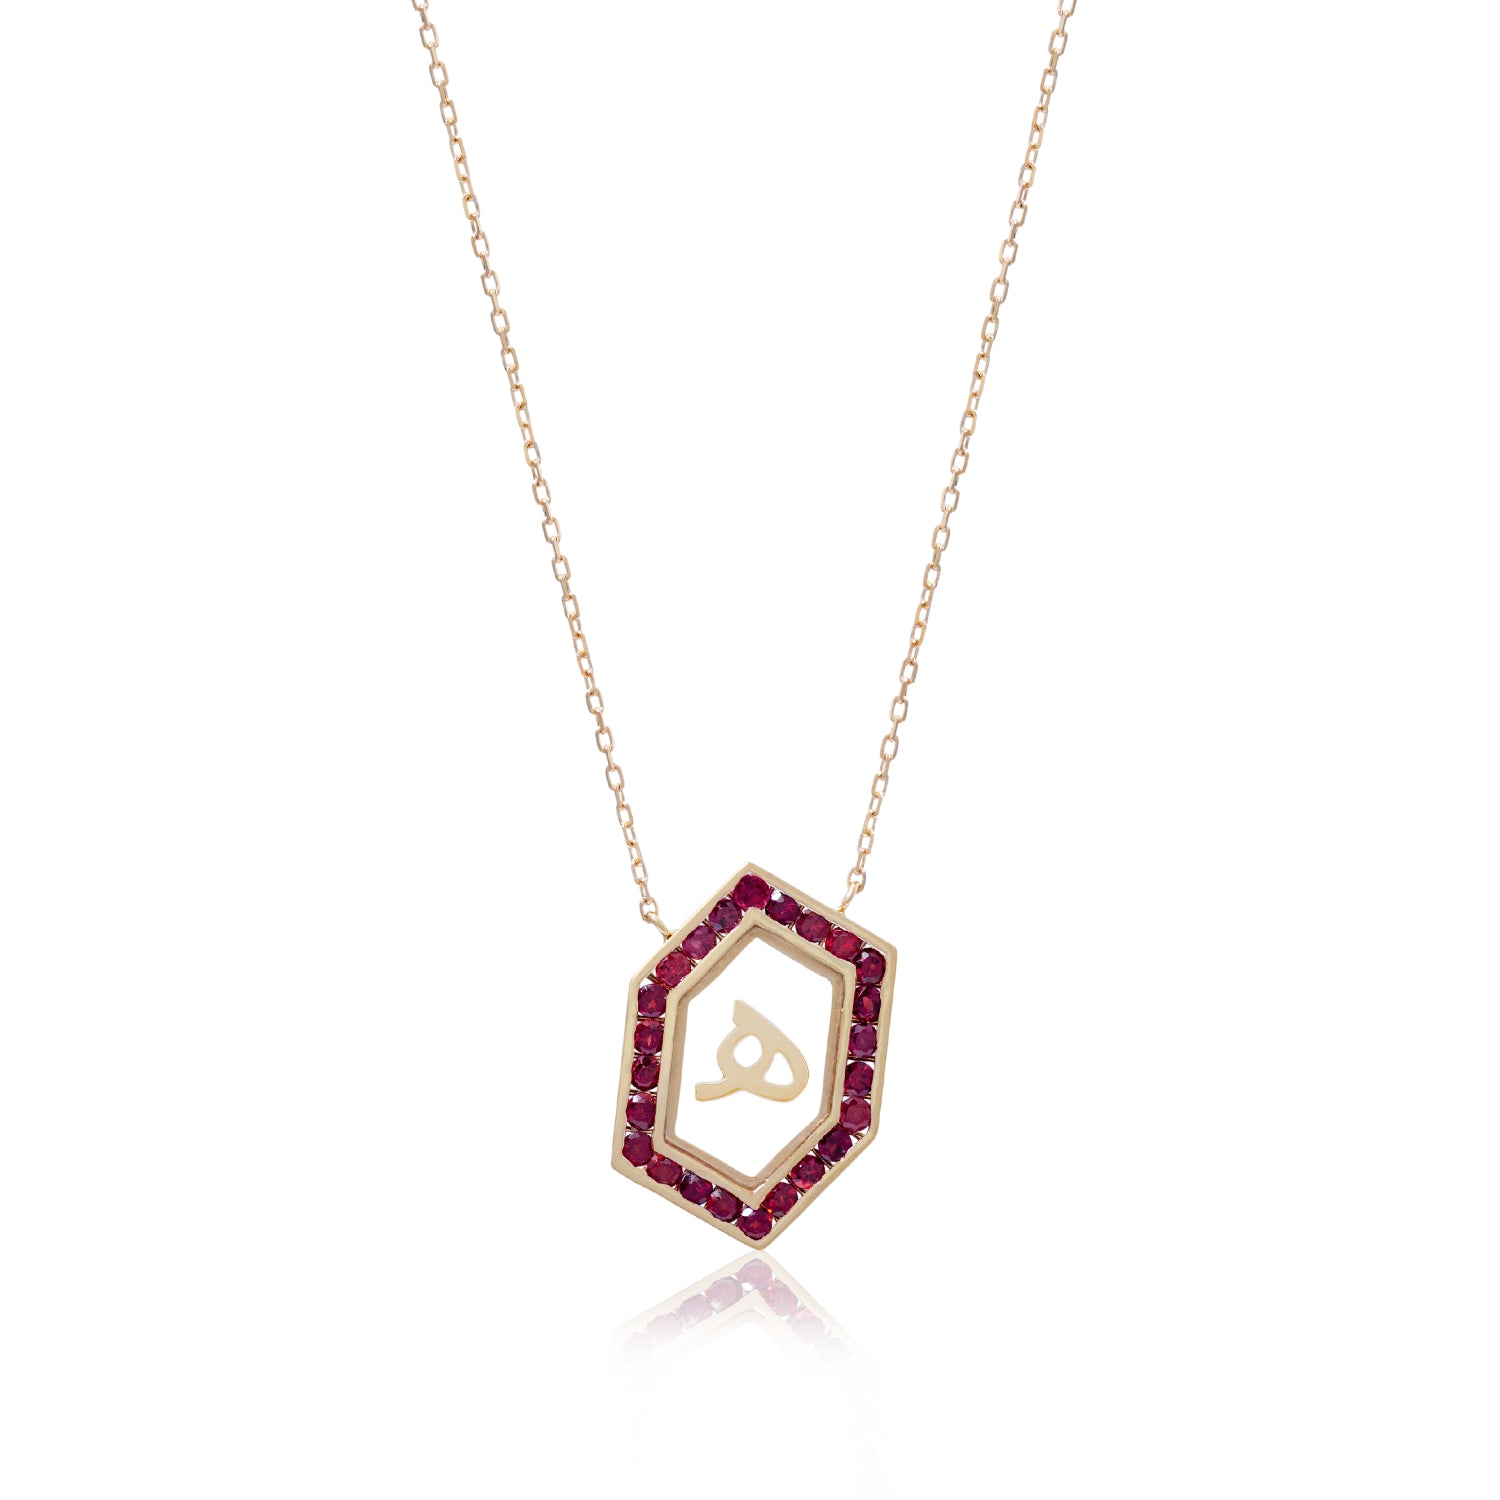 Qamoos 1.0 Letter هـ Ruby Necklace in Yellow Gold